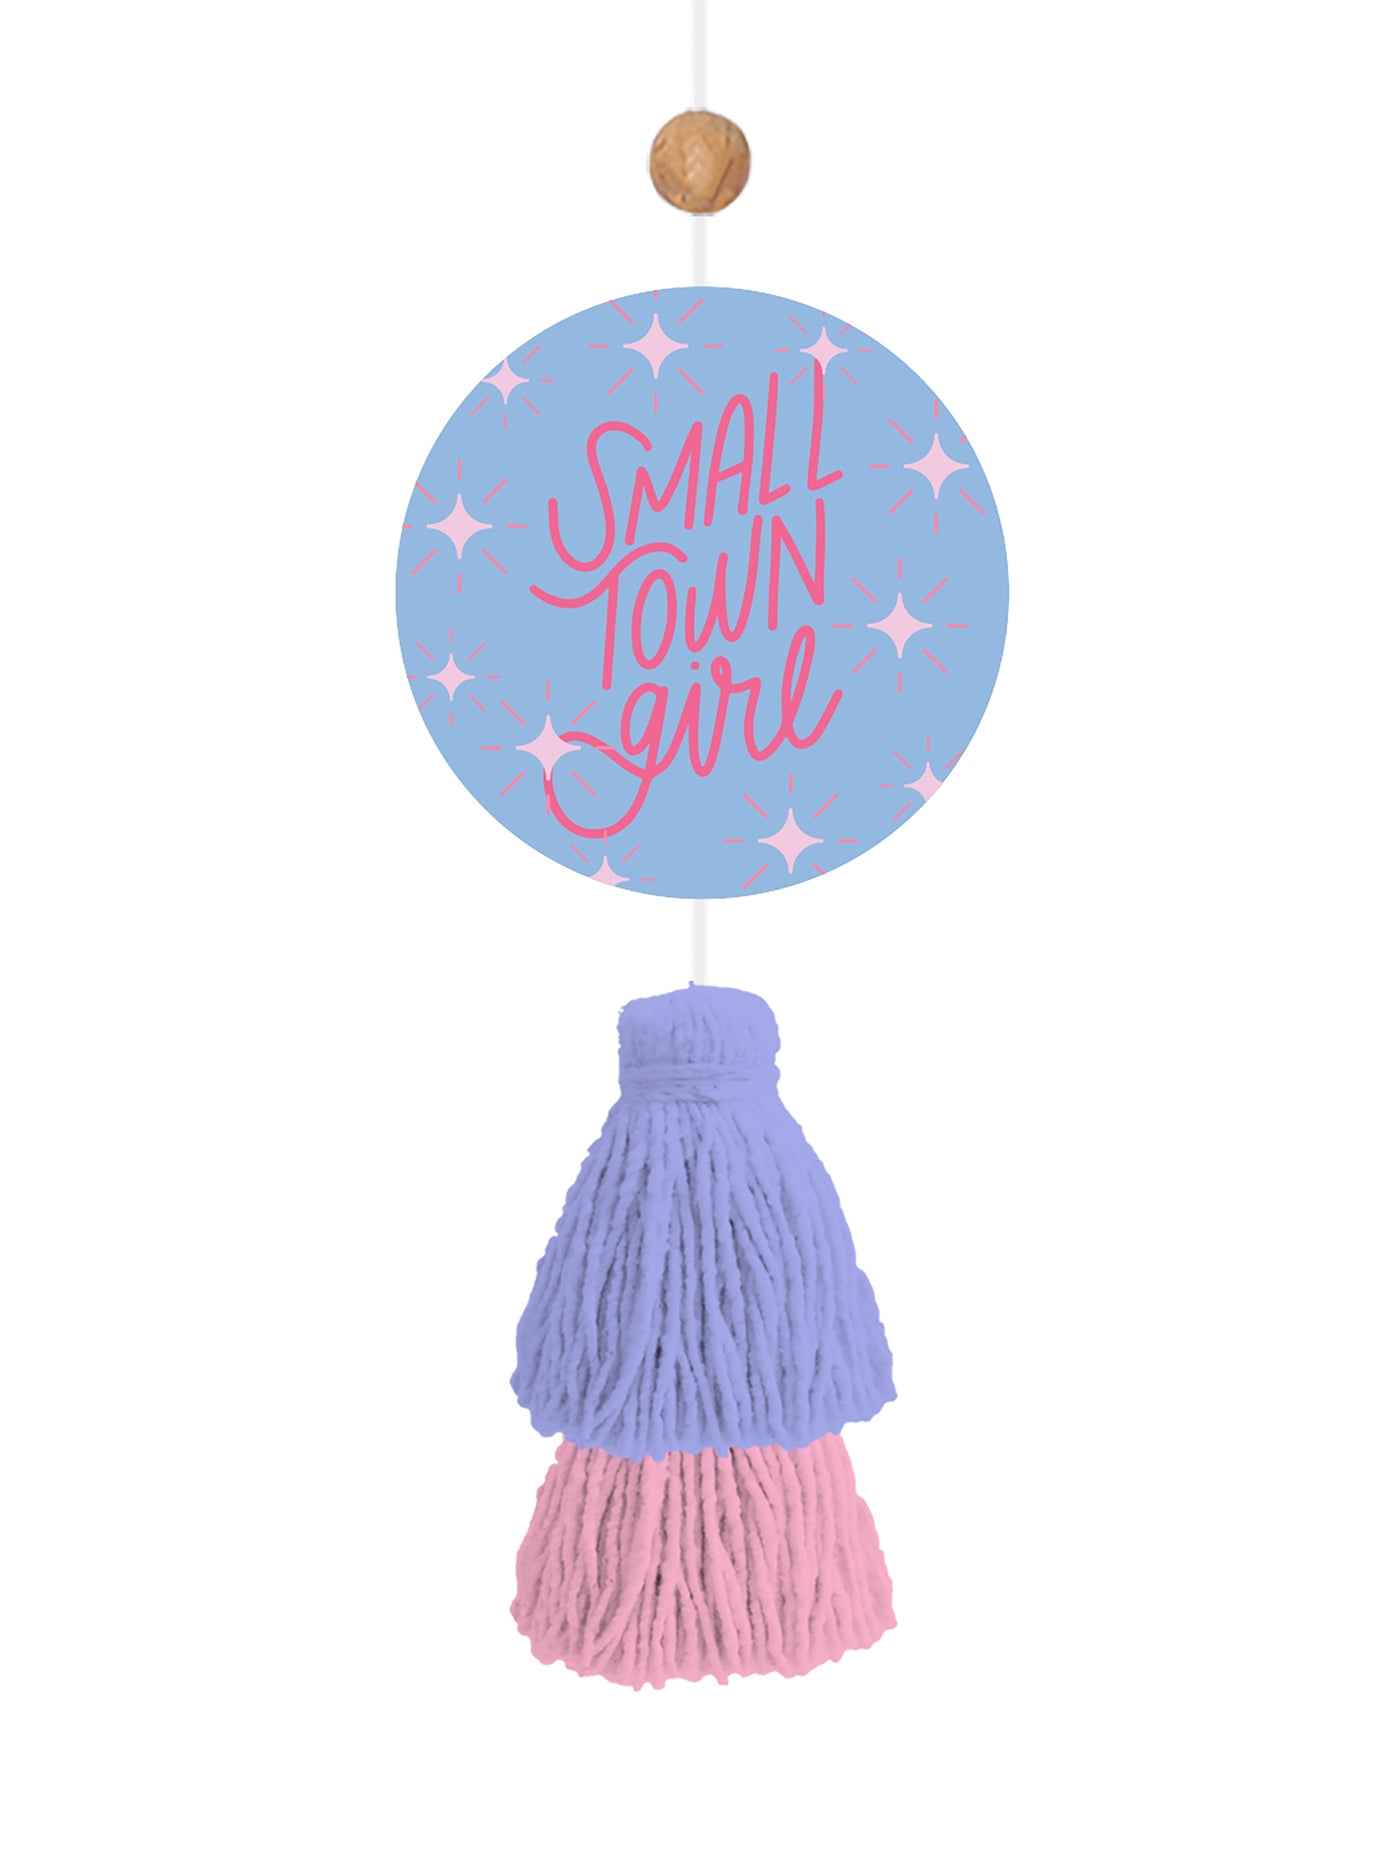 Air Freshener | Small Town Girl - Set of 2